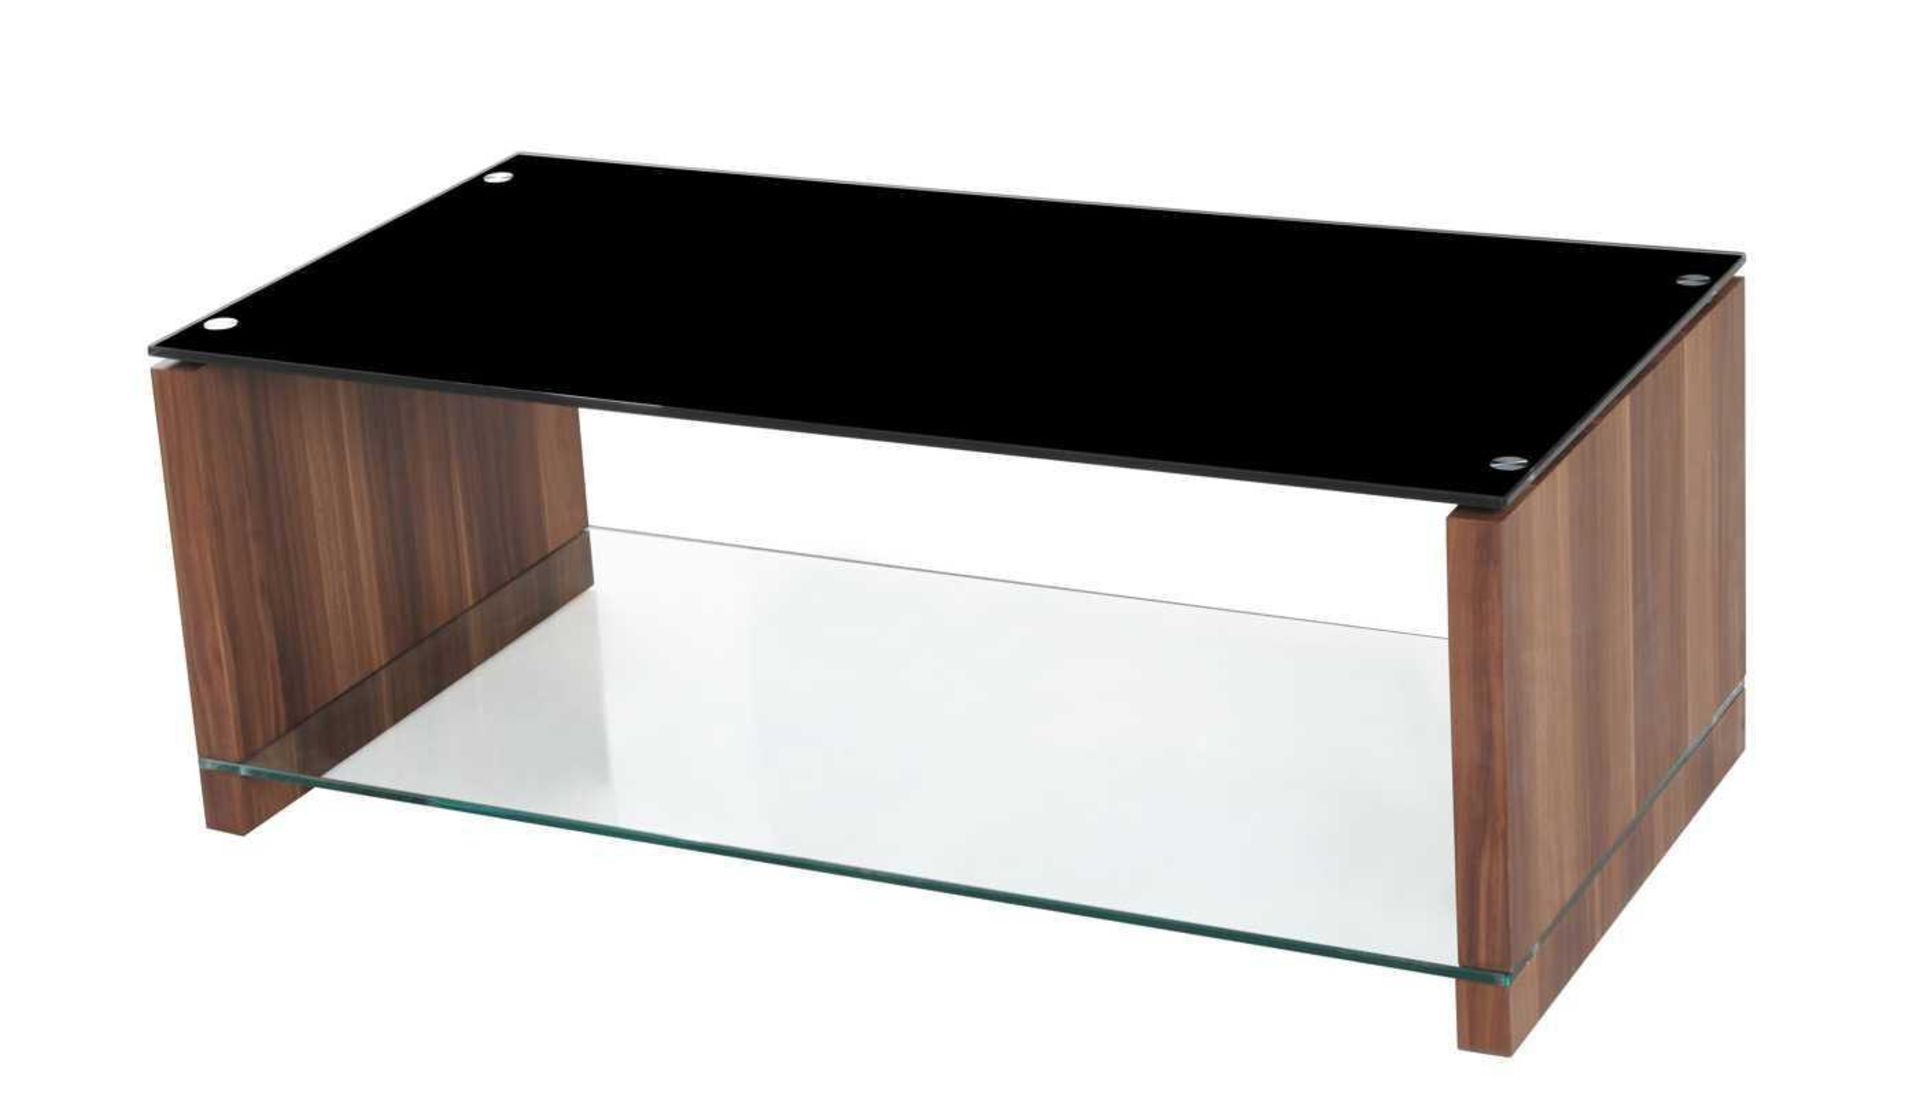 RRP £270 - Boxed 'Atlanta' Coffee Table In Walnut Finish With Black Glass Top (Appraisals